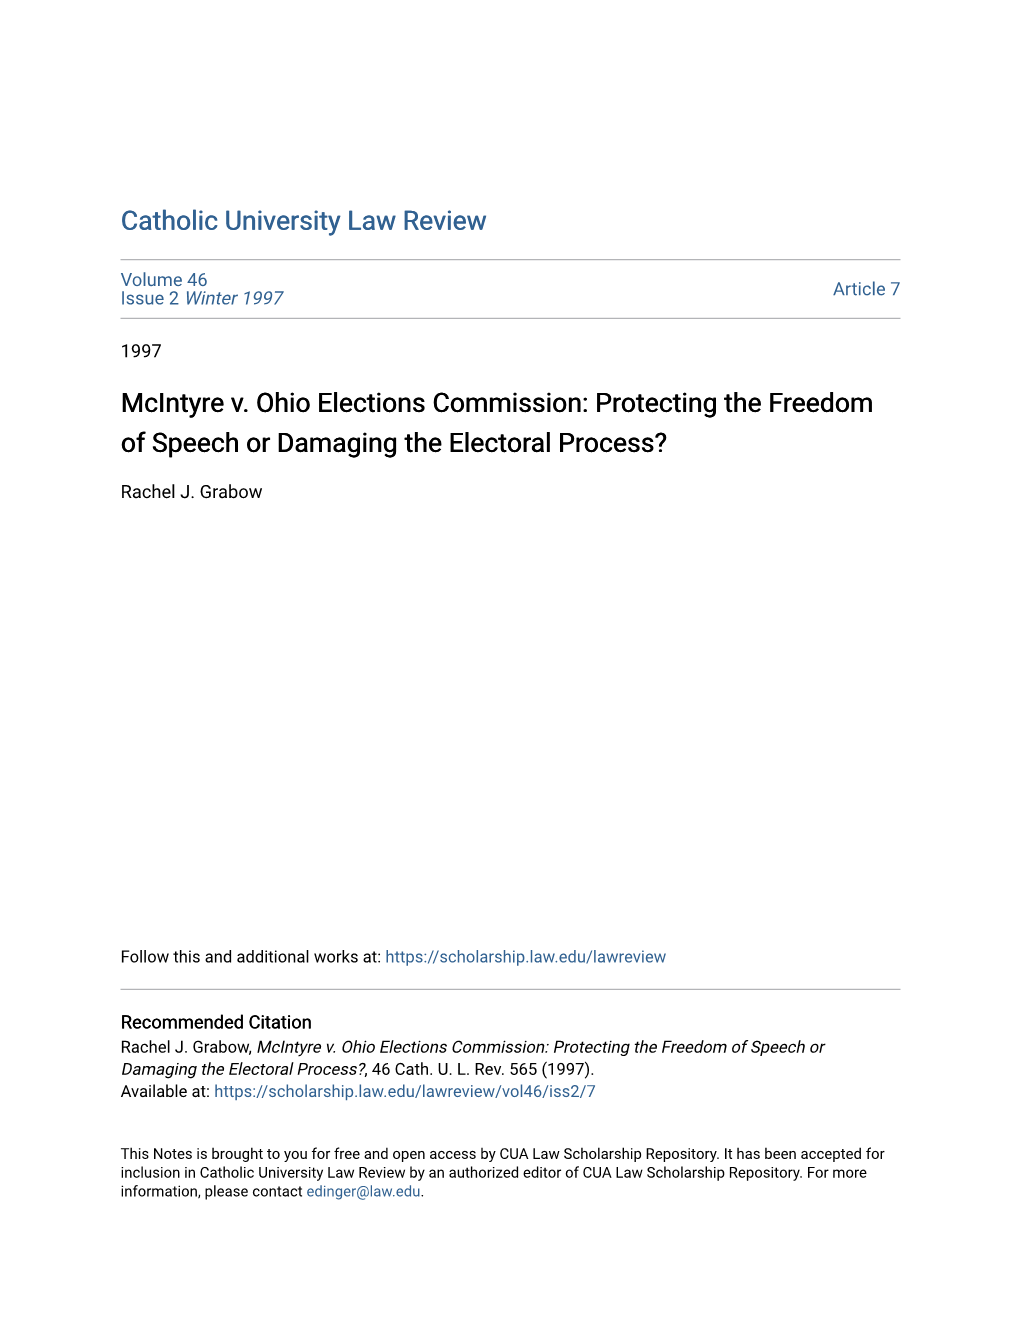 Mcintyre V. Ohio Elections Commission: Protecting the Freedom of Speech Or Damaging the Electoral Process?